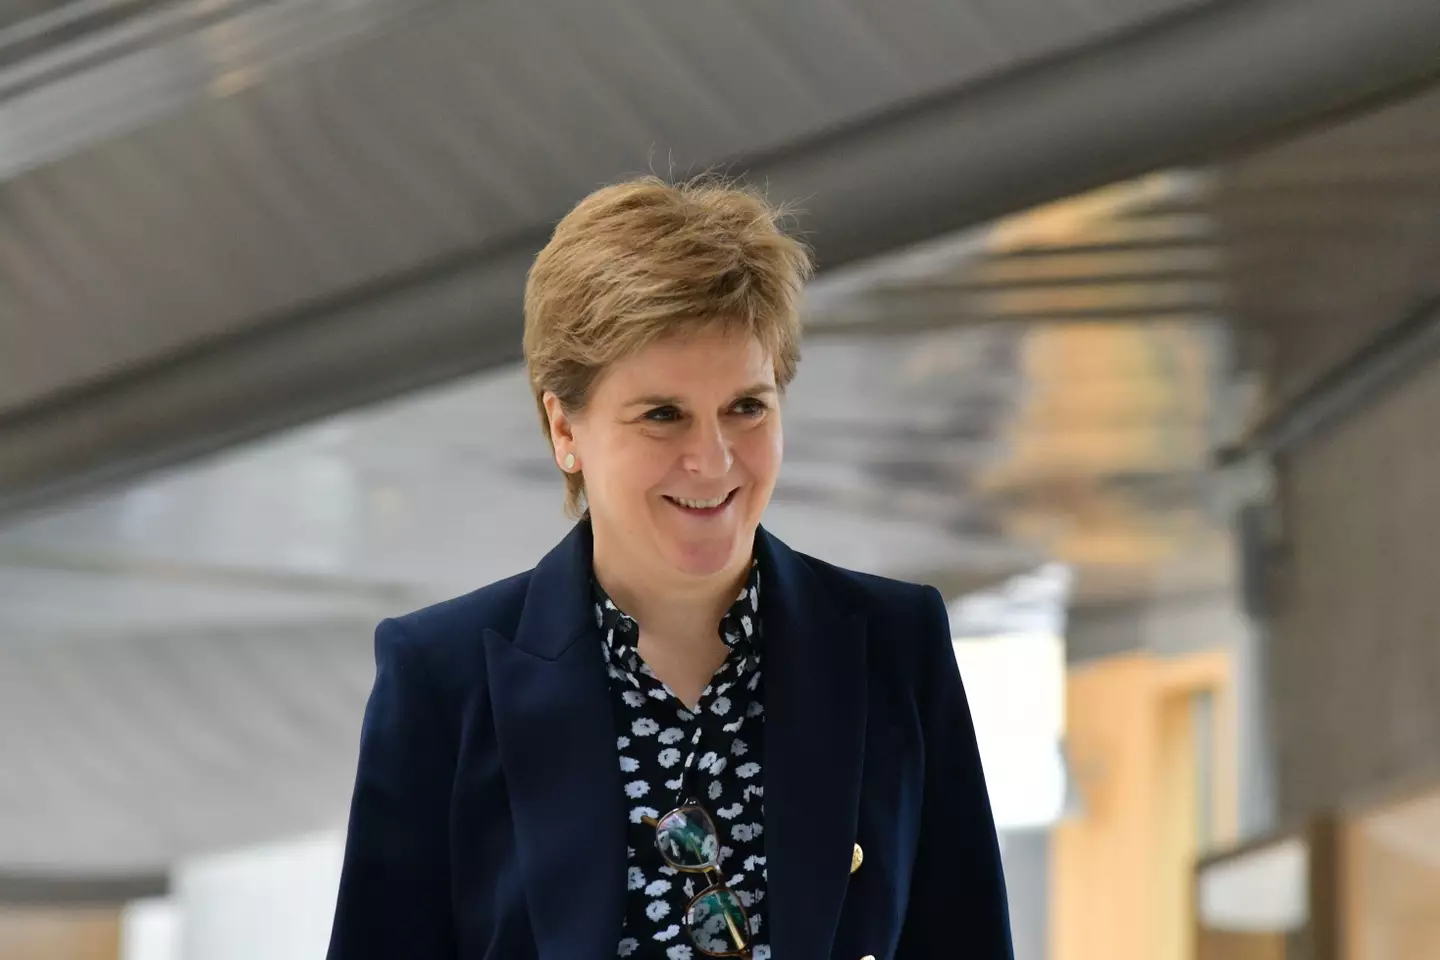 Nicola Sturgeon was arrested in the police investigation into the SNP’s finances.